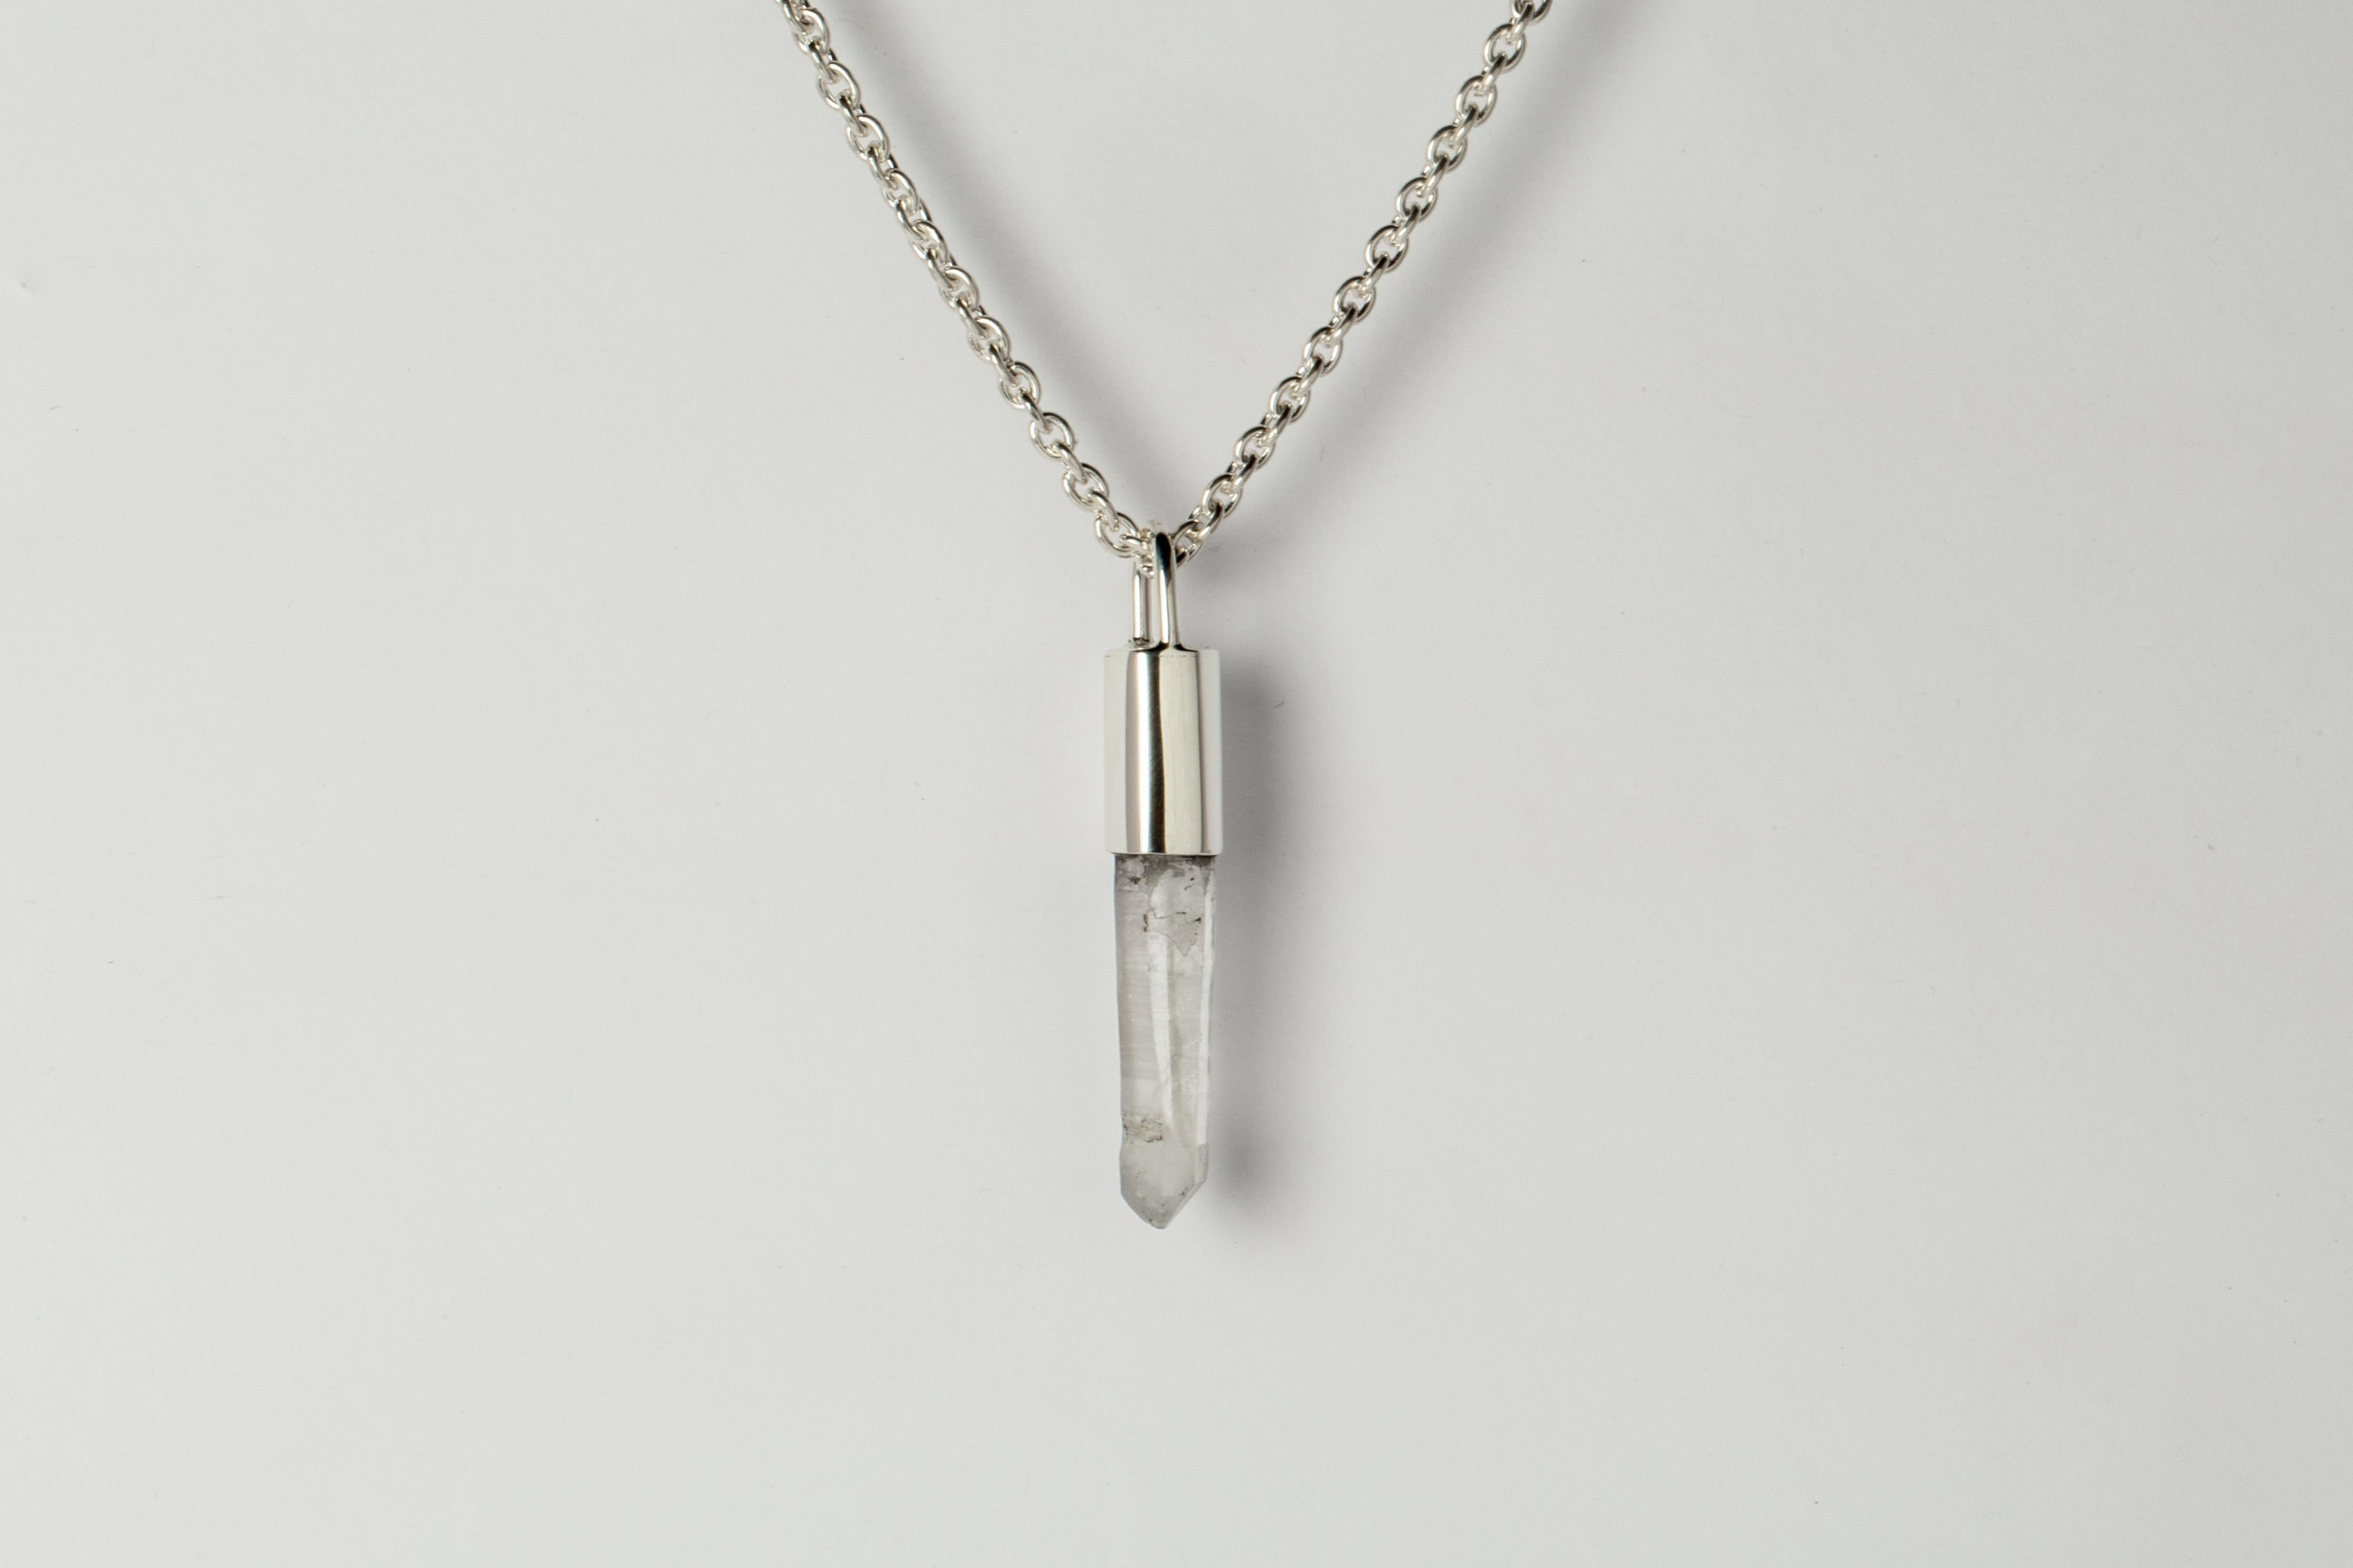 Pendant necklace in polished sterling silver and a rough of Misc Quartz. It comes on 74 cm sterling silver chain.

The Talisman series is an exploration into the power of natural crystals. The crystals used in these pieces are discovered through